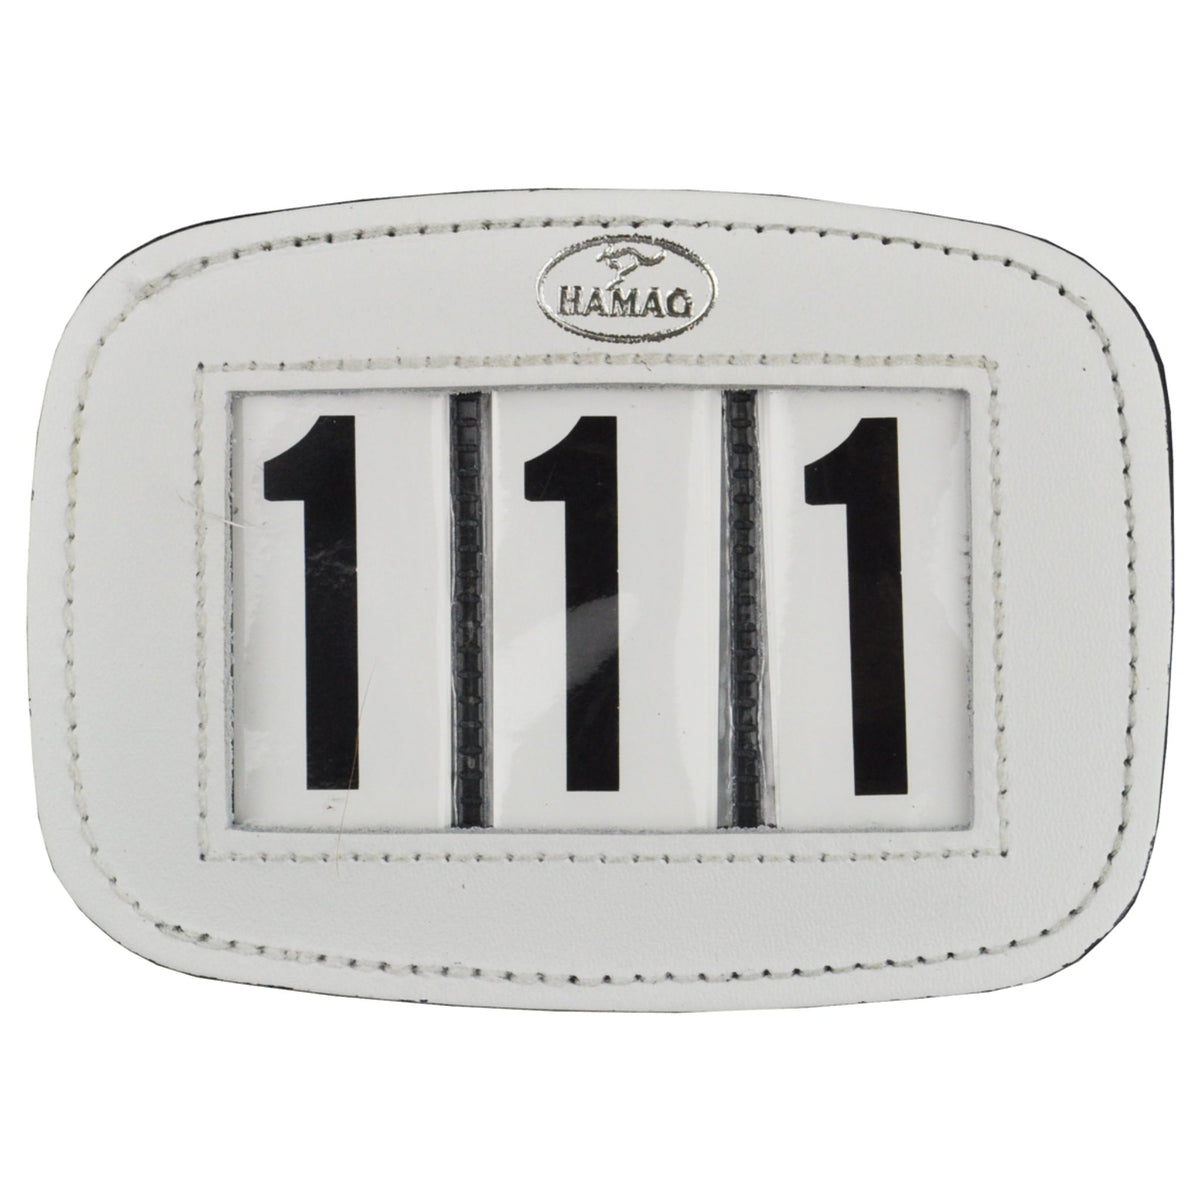 White leather saddle pad number with 3 digits.